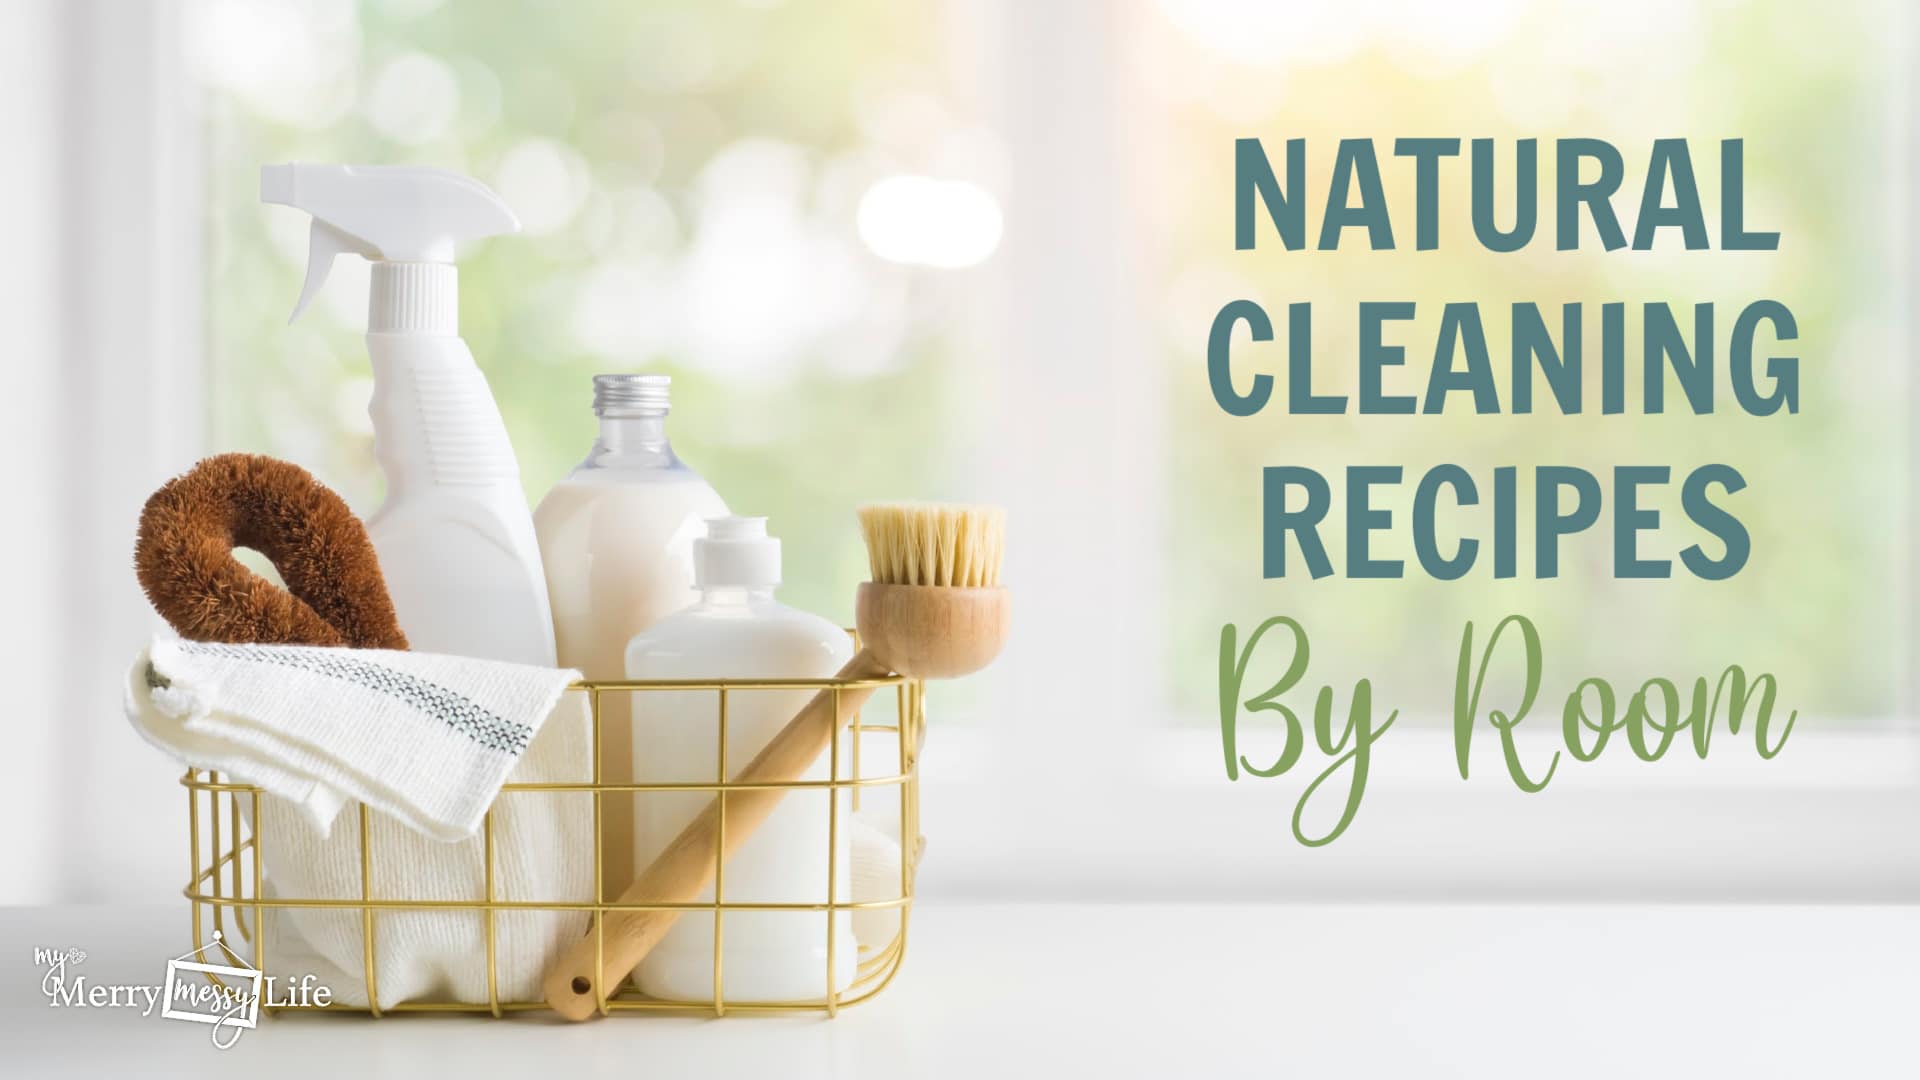 Natural Cleaning Recipes by Room - you can easily and affordably clean your home with natural recipes and in this post, I show you how!